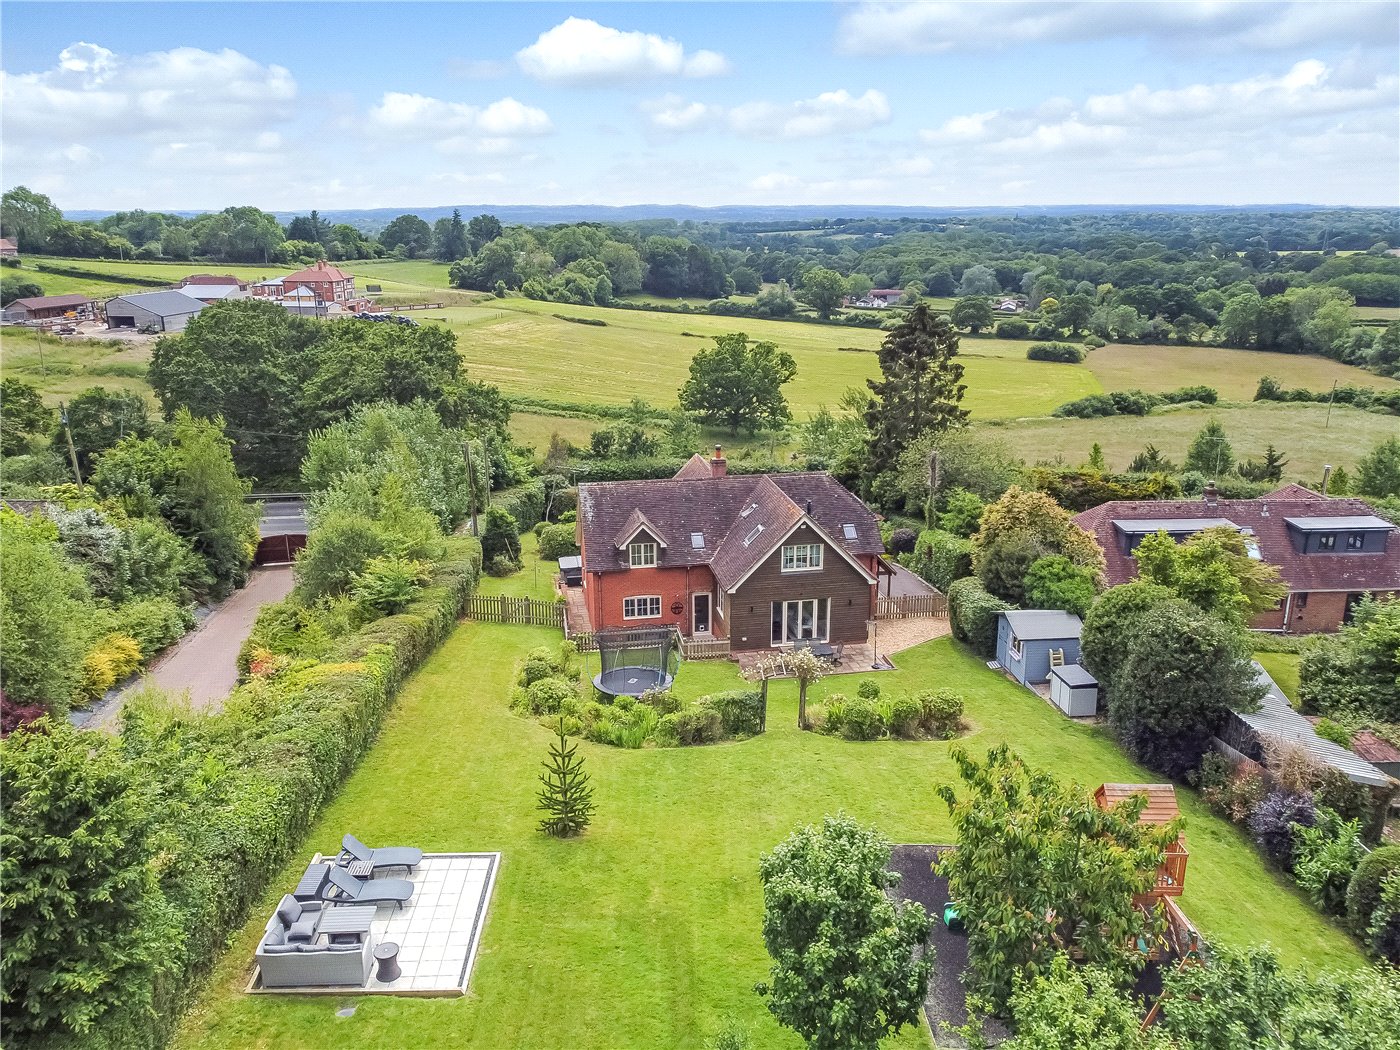 Dunwood Hill, East Wellow, Romsey, Hampshire, SO51